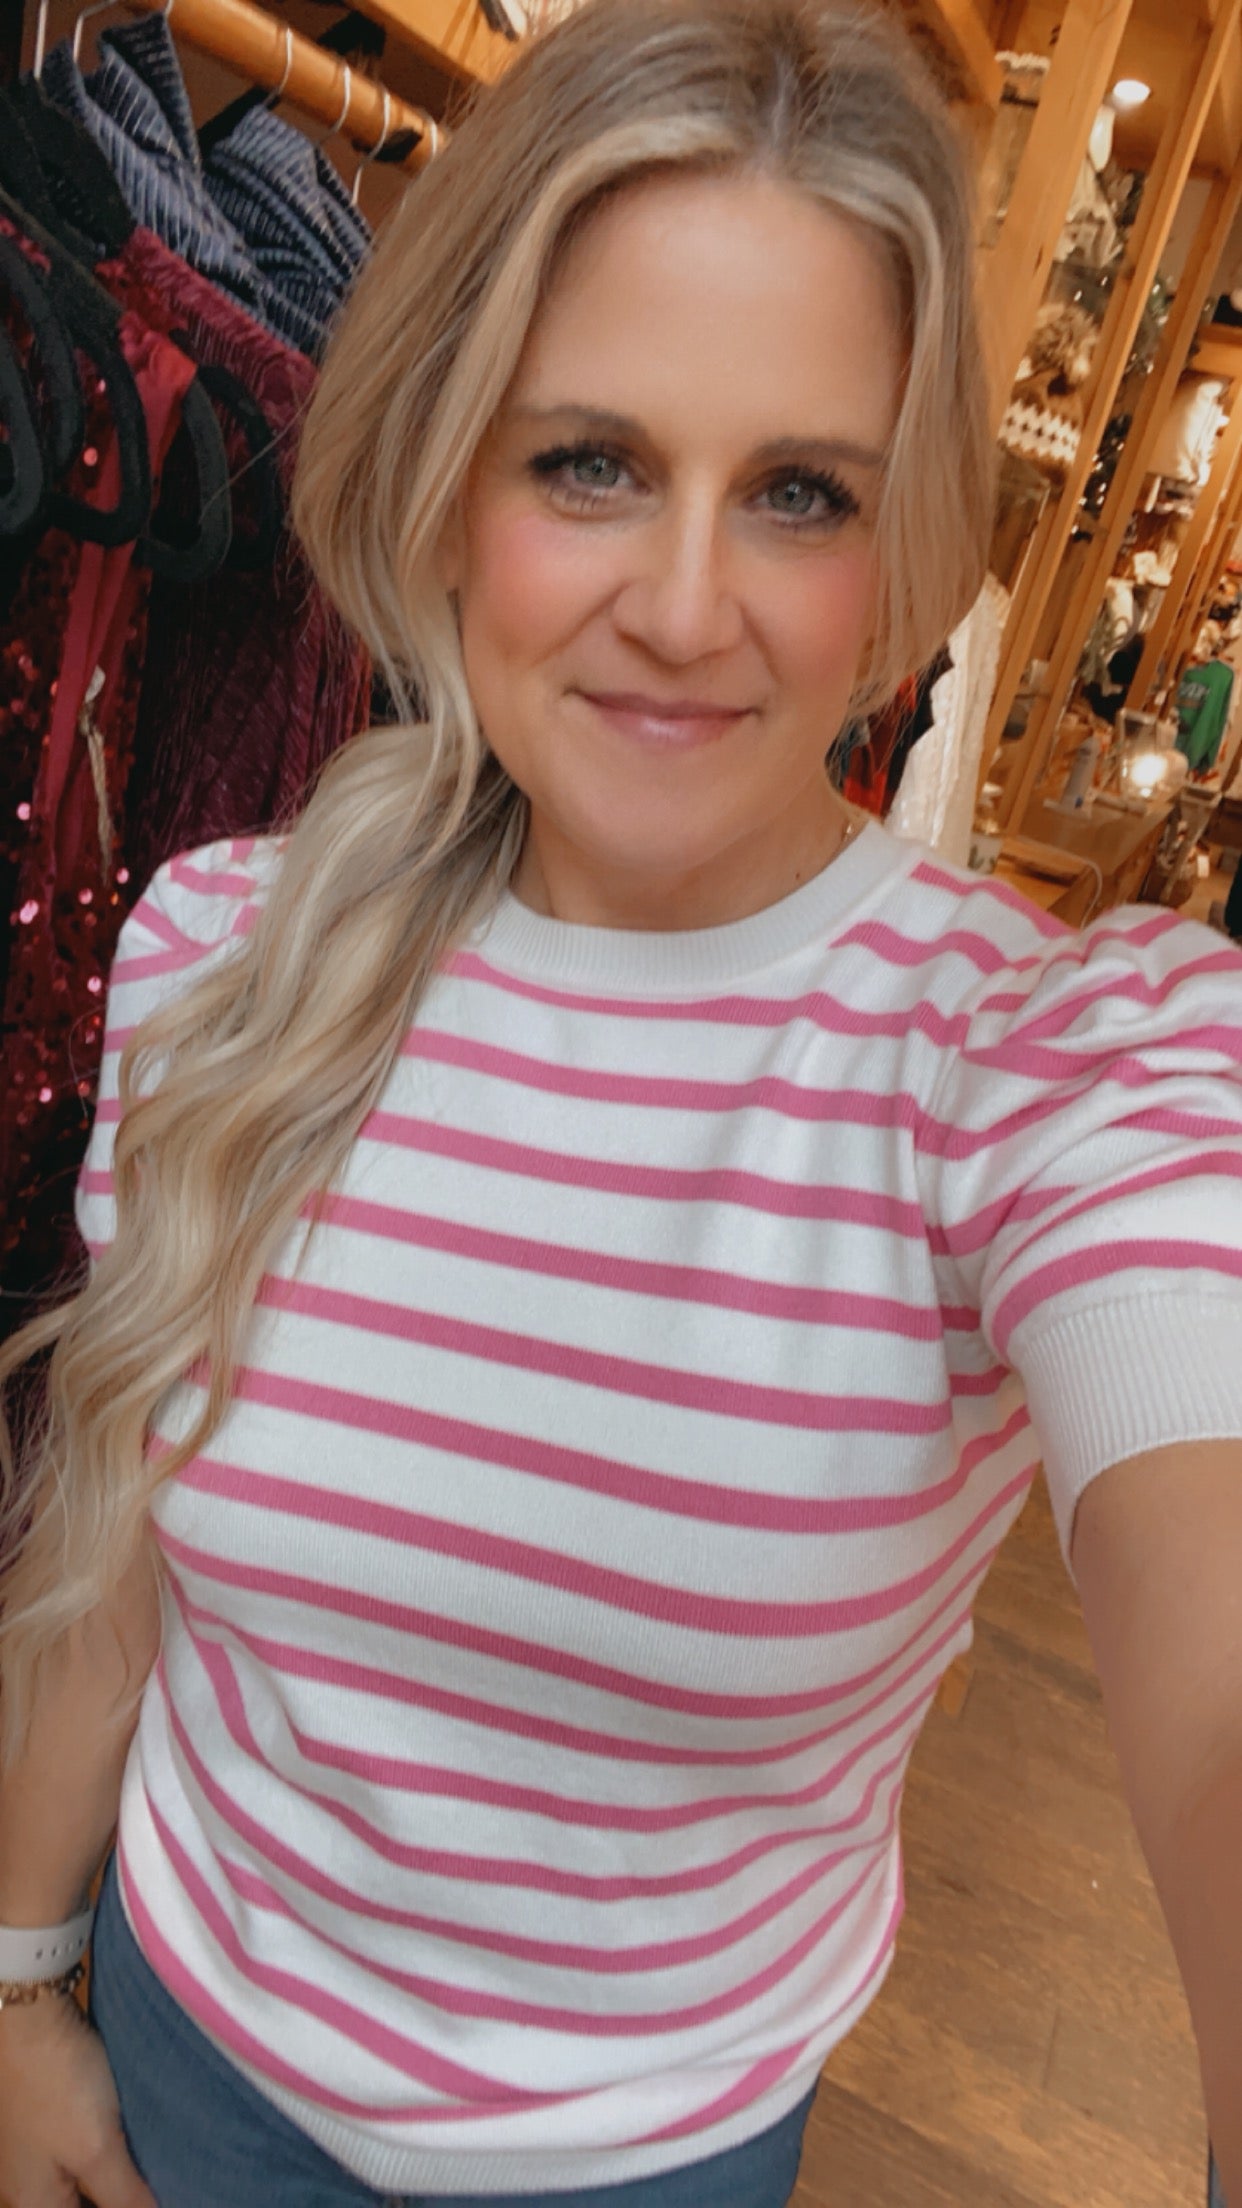 Paxton Pink sweater top